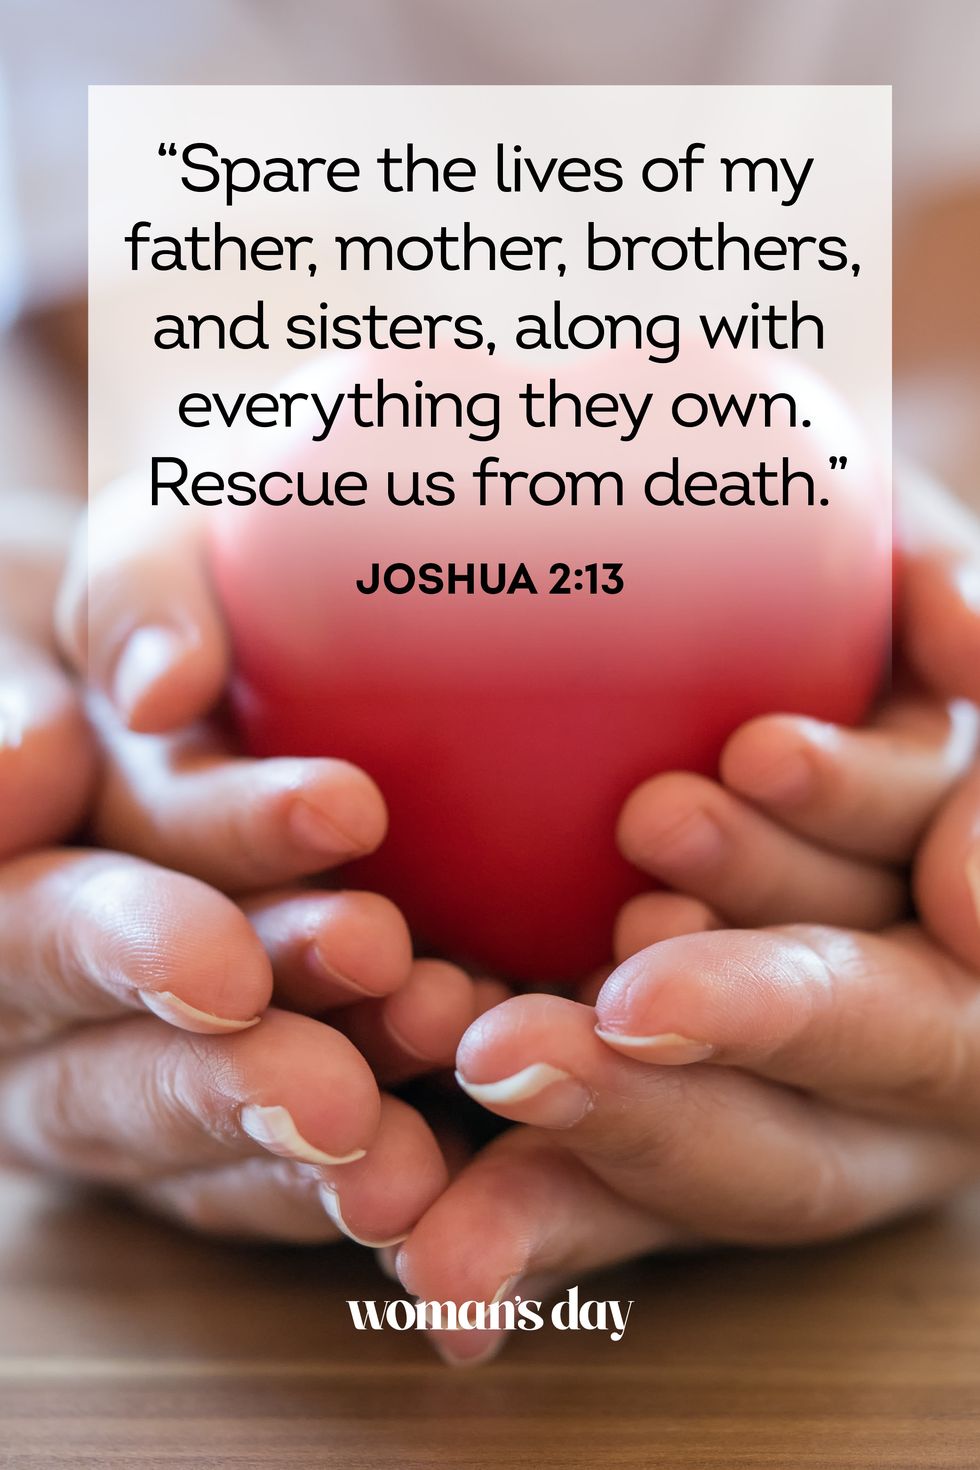 bible verses about mothers joshua 2 13